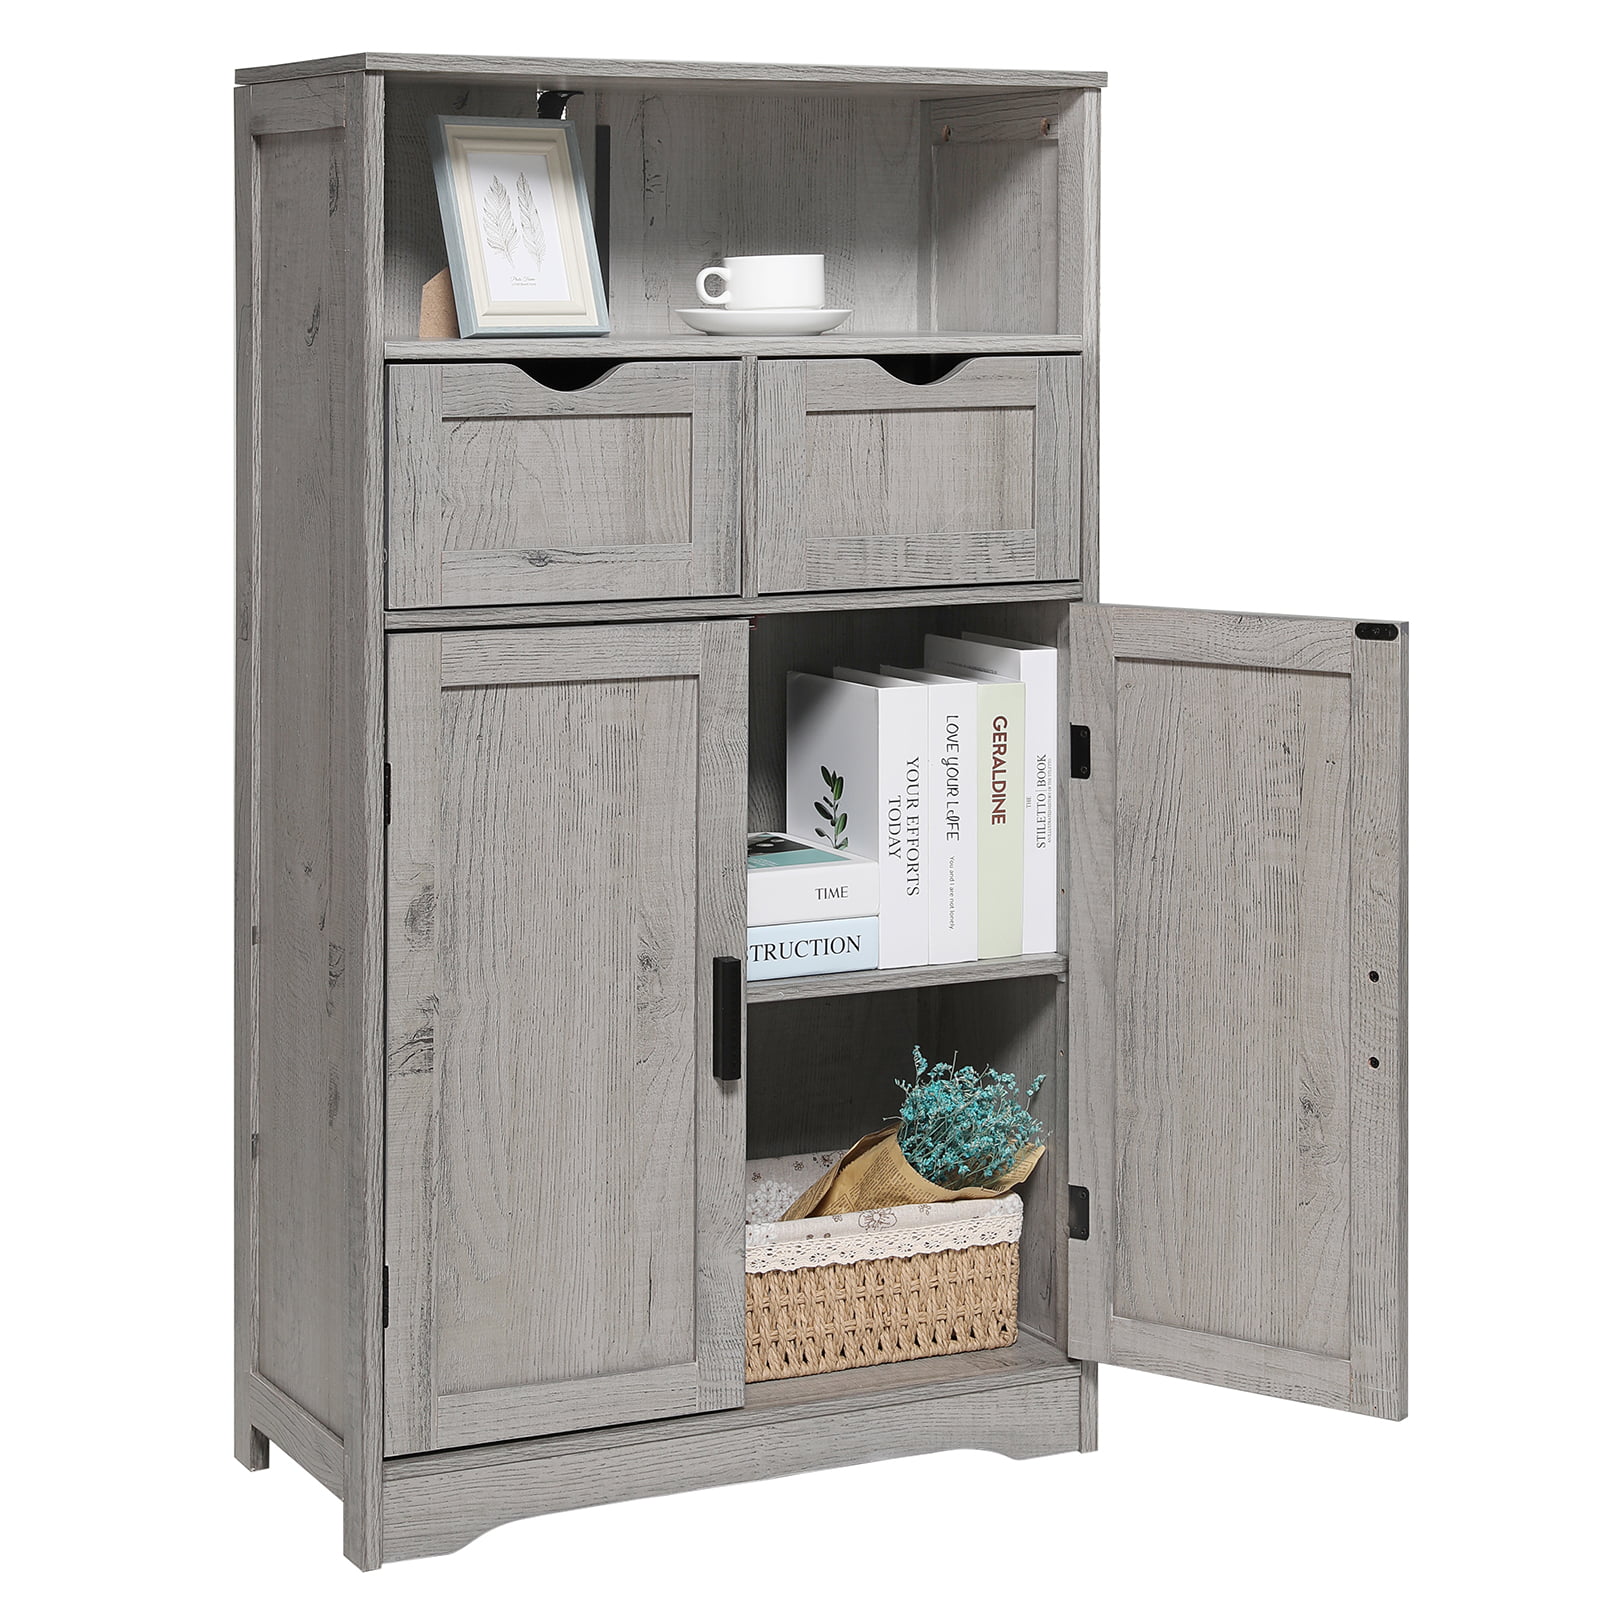  Iwell Bathroom Cabinet with Drawer and Storage Shelf